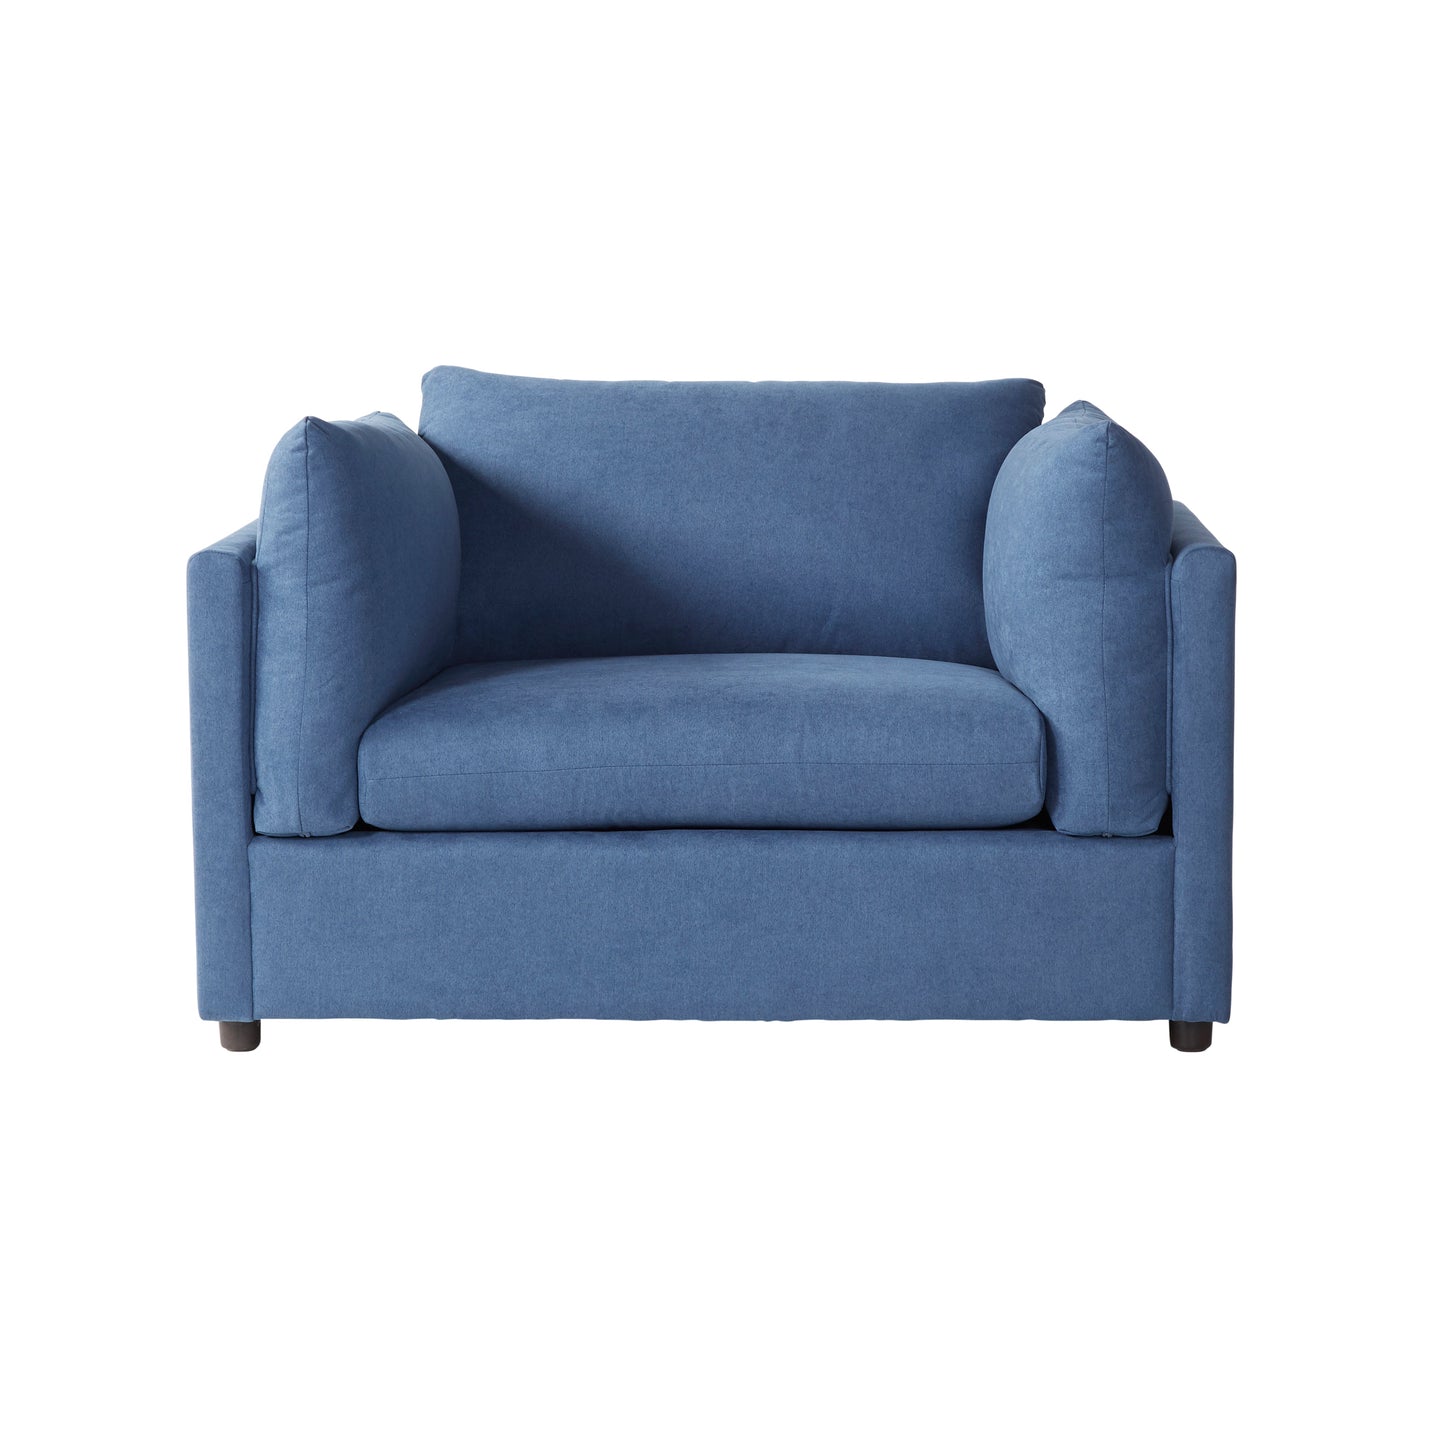 Roundhill Furniture Enda Oversized Living Room Pillow Back Cuddler Arm Chair with Ottoman, Image Navy